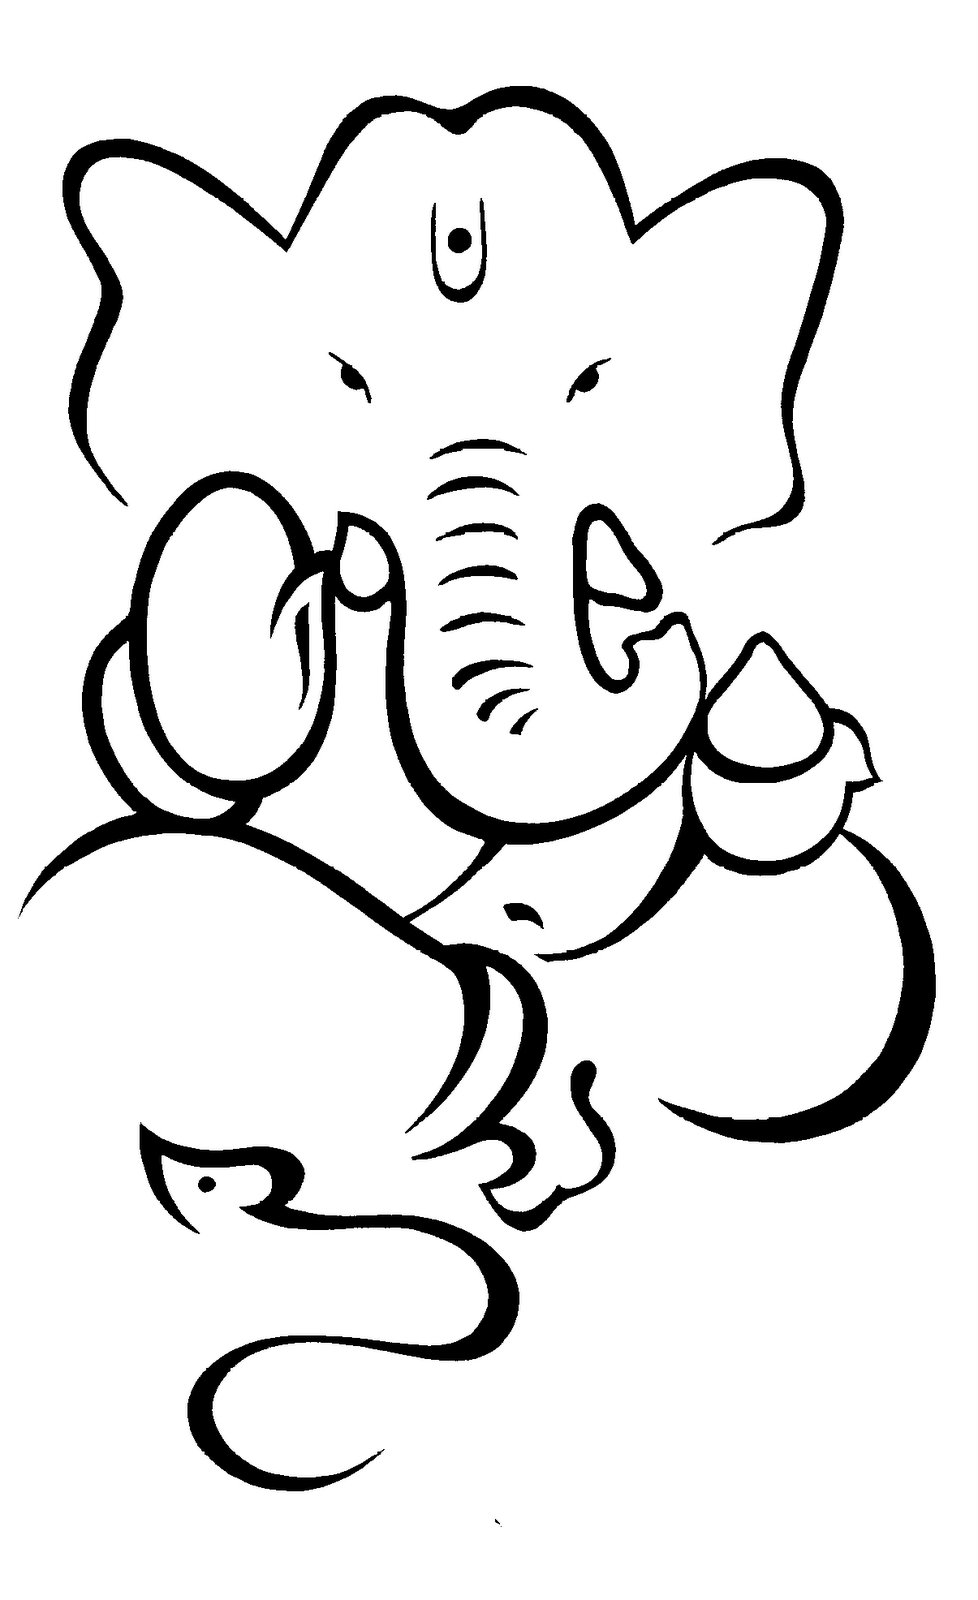 Elephant Side View Drawing